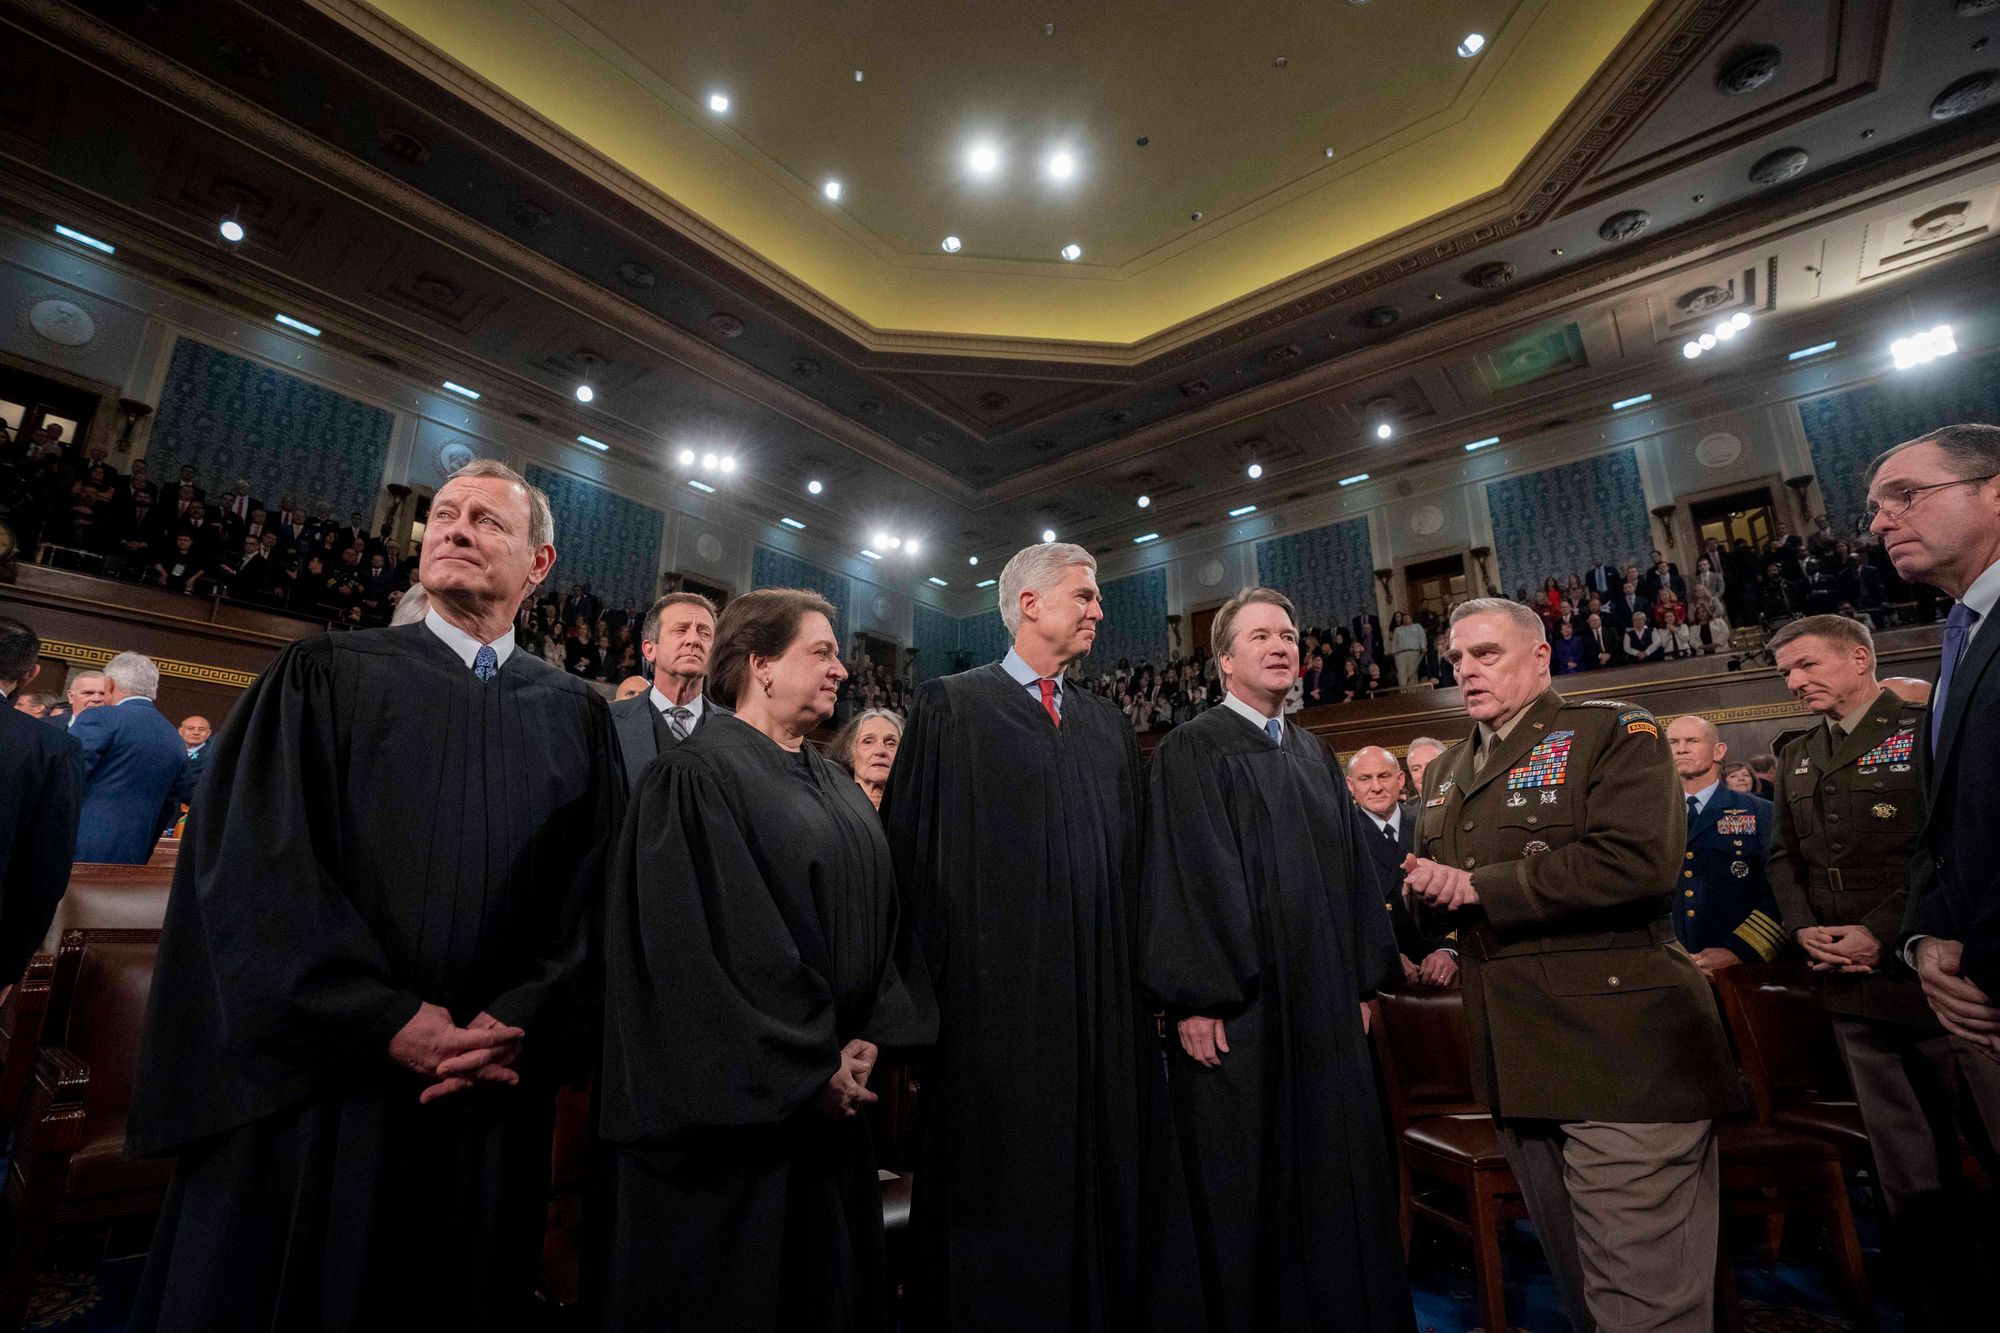 Members of the Supreme Court during a State of the Union address in 2020. Photo: The White House